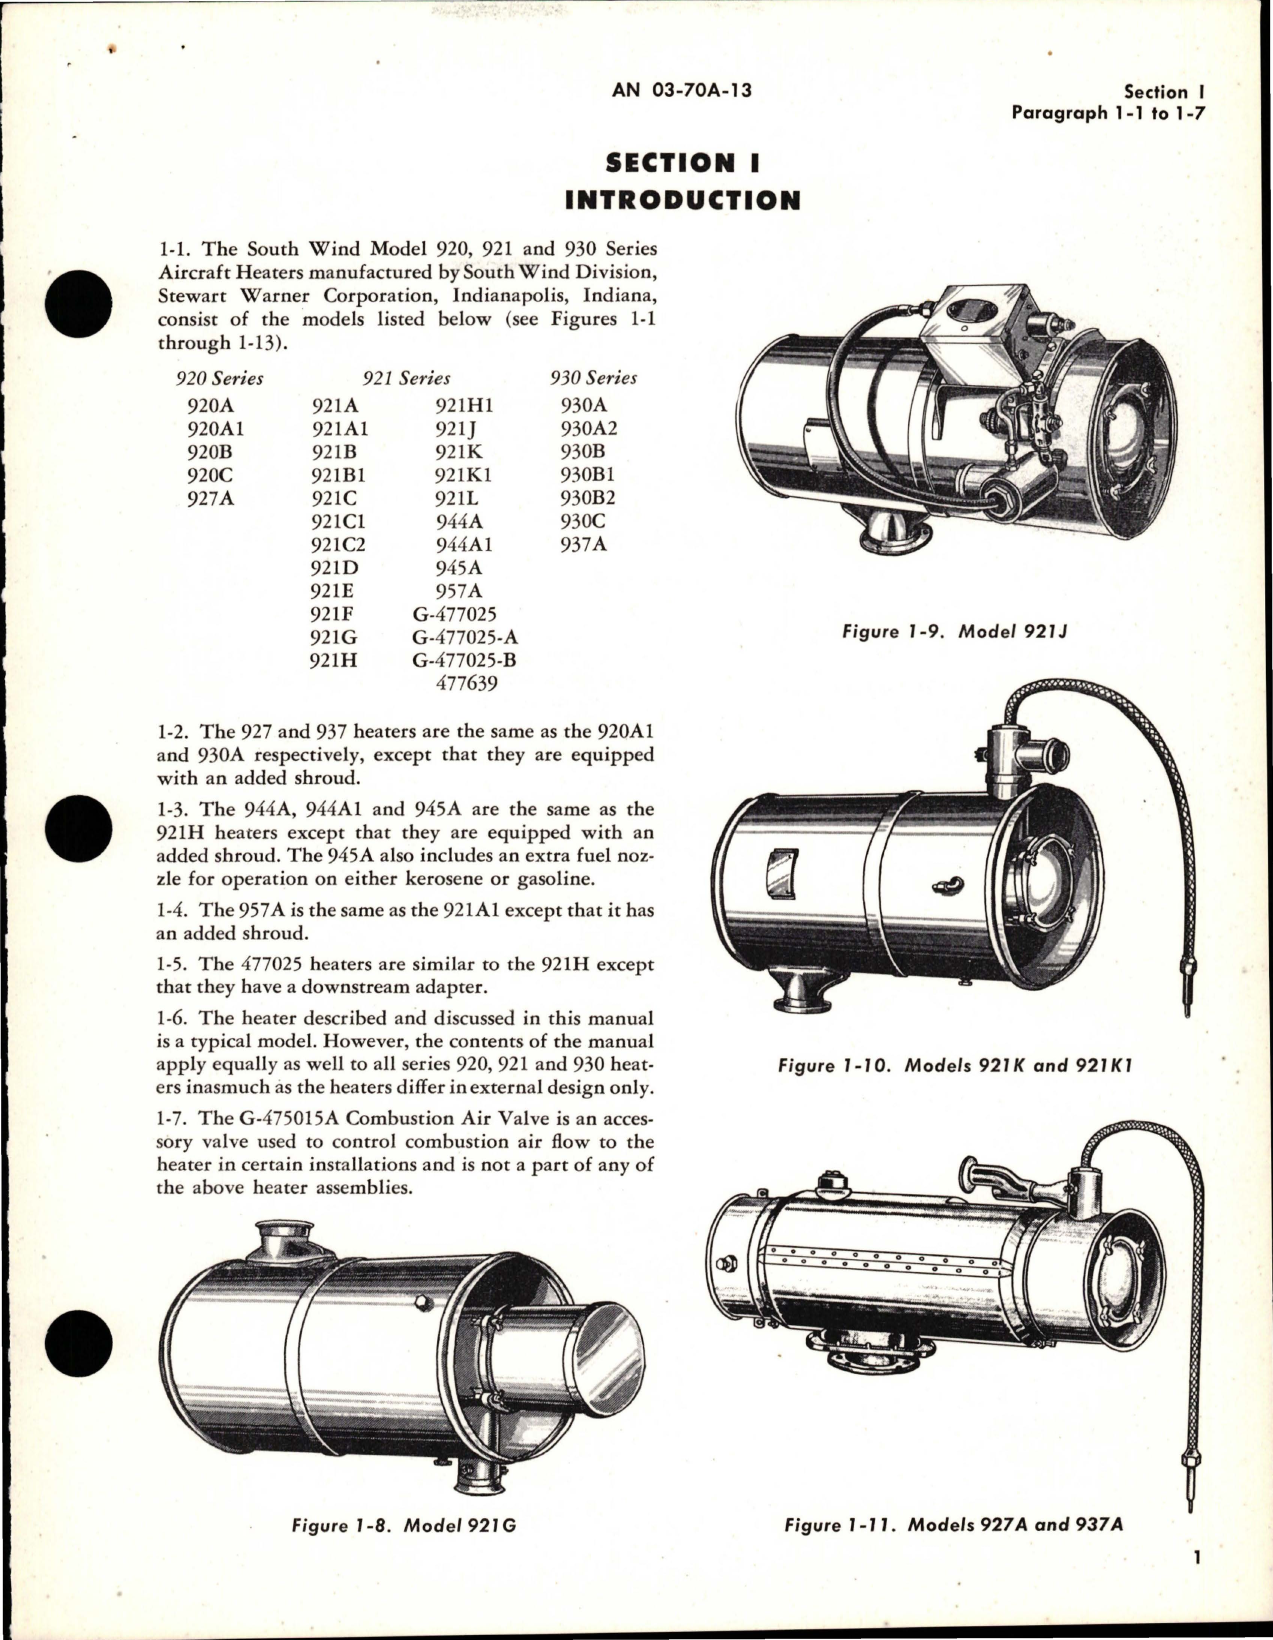 Sample page 5 from AirCorps Library document: Overhaul Instructions for Aircraft Heaters - Models 920, 921, and 930 Series - Combustion Air Valve - G-475015-A 